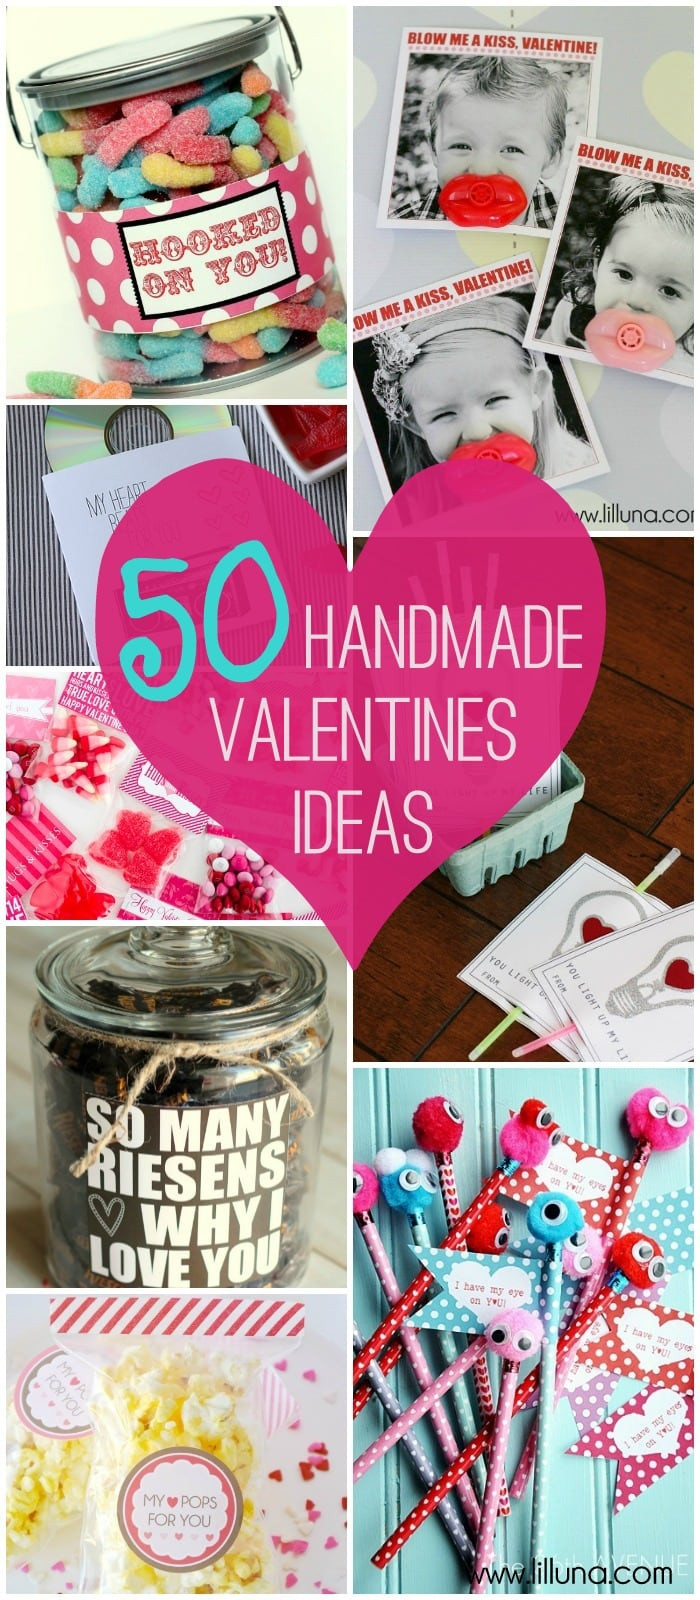 Awesome Valentines Day Ideas For Her
 Valentines Ideas